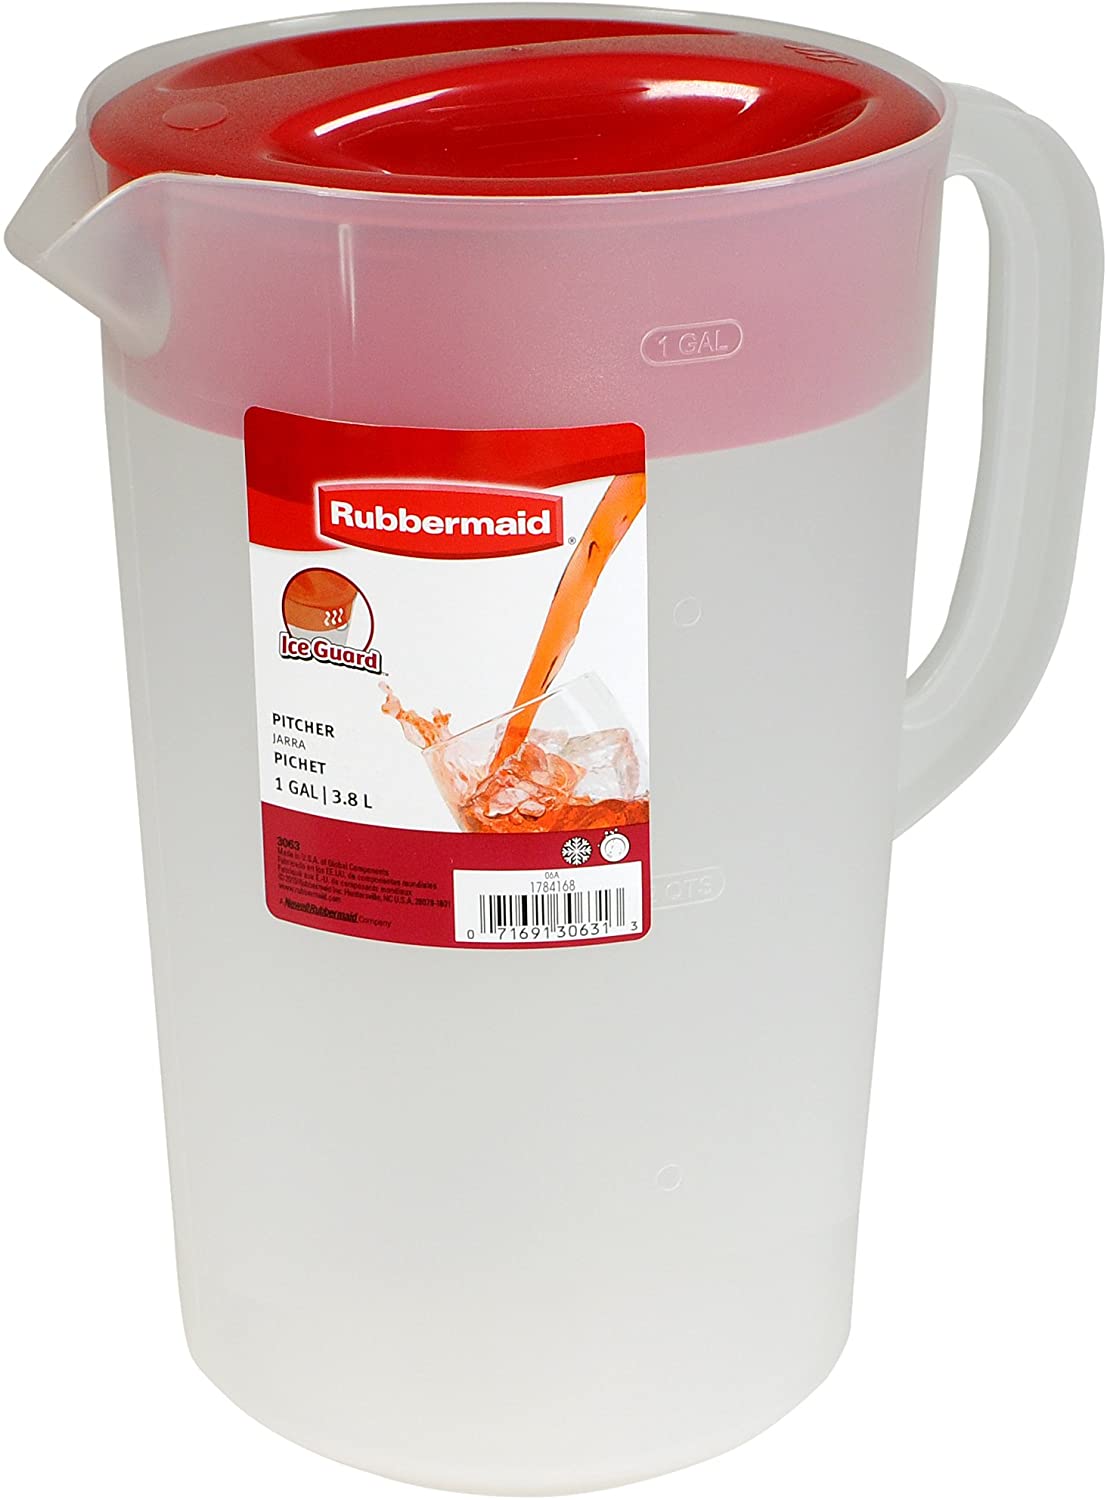 Rubbermaid Beverage Classic Pitcher, Red Cover, 3.8 L - Whole and All